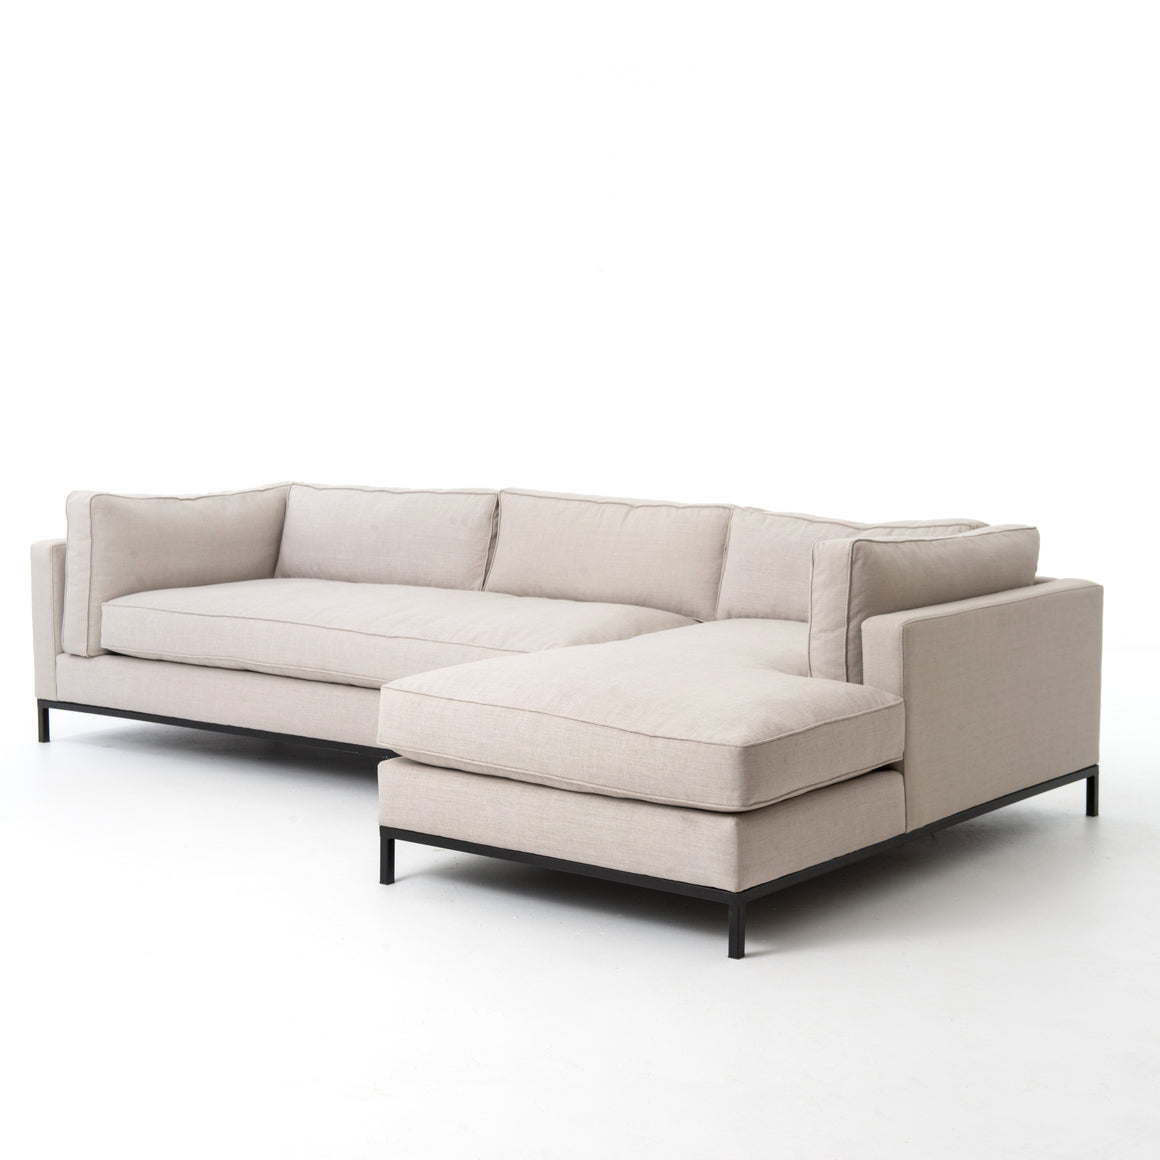 Grammercy 2 Piece Sectional With Chaise - Natural